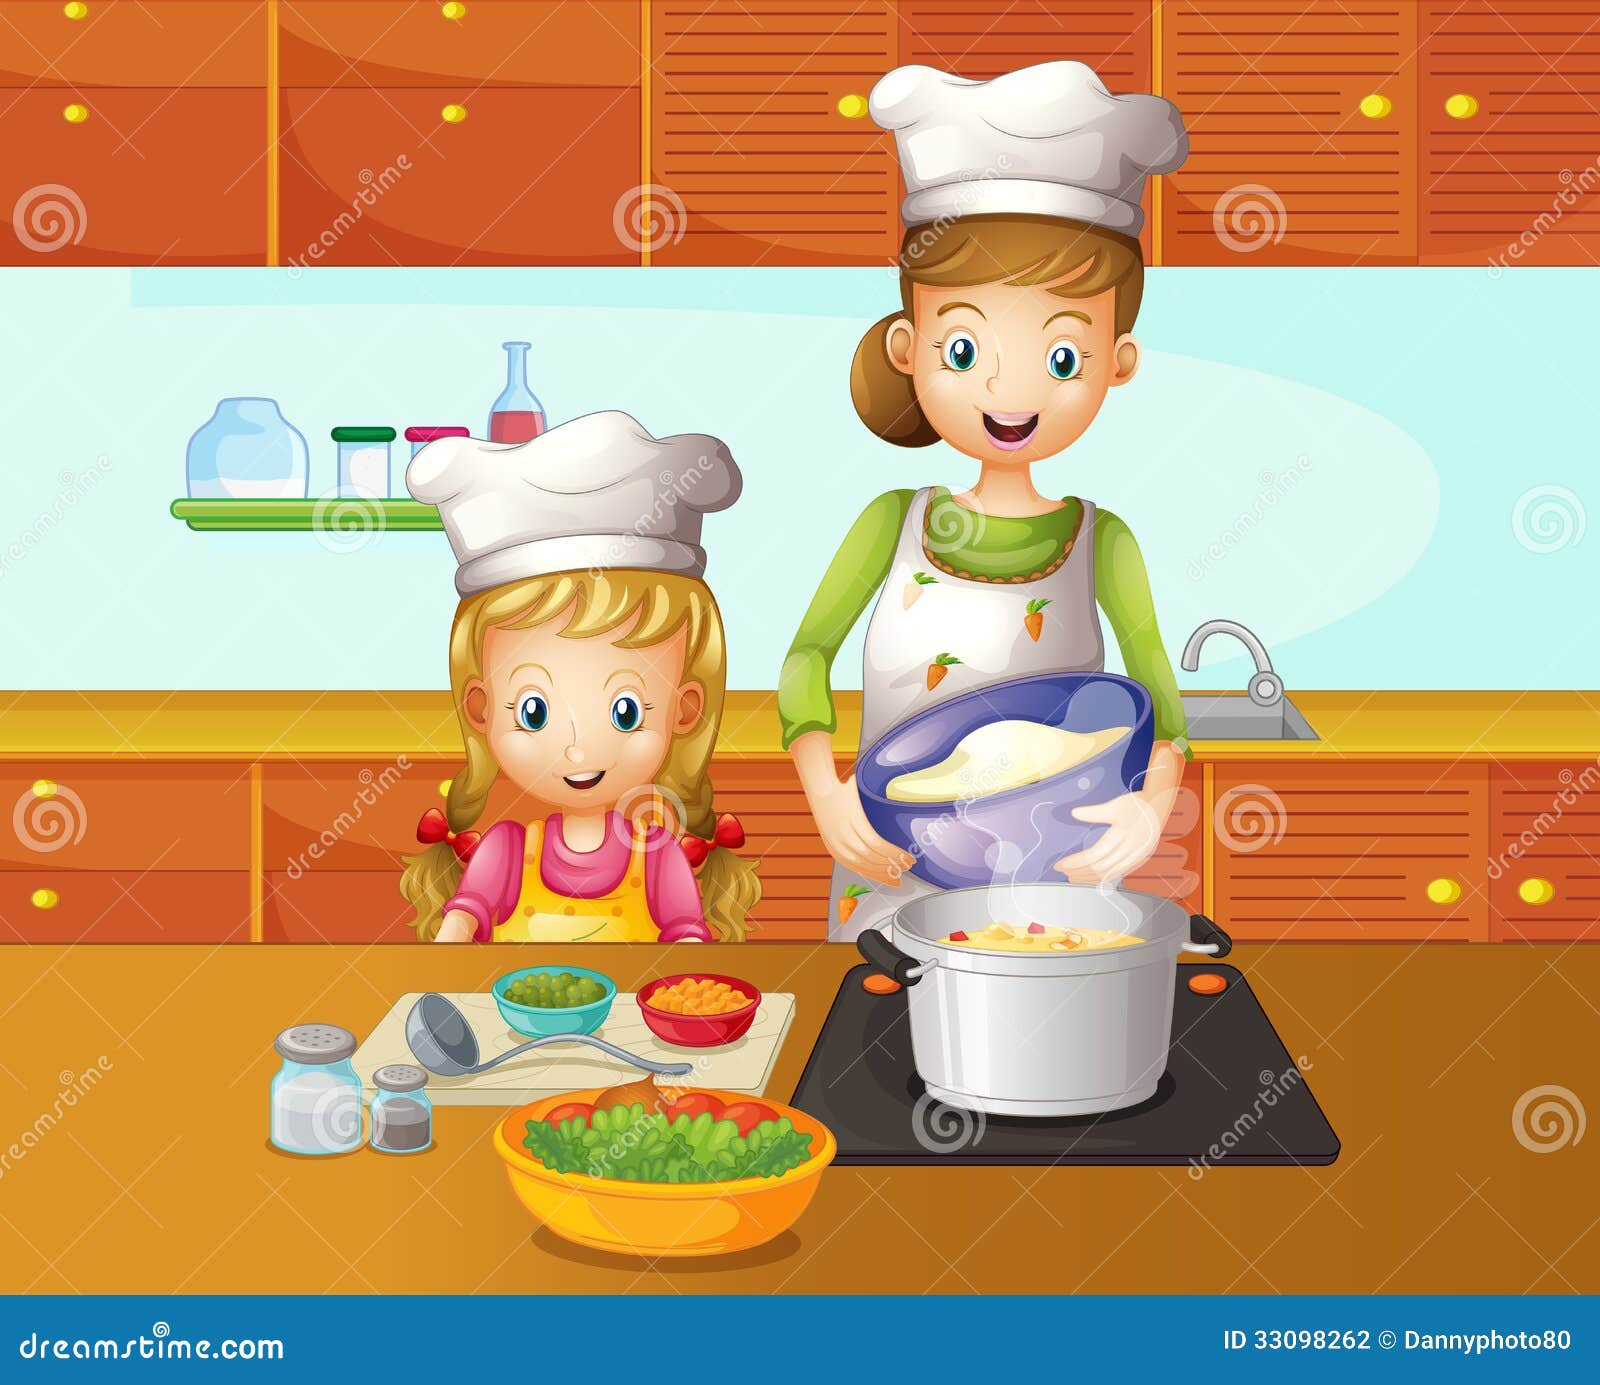 clipart of mother cooking - photo #42